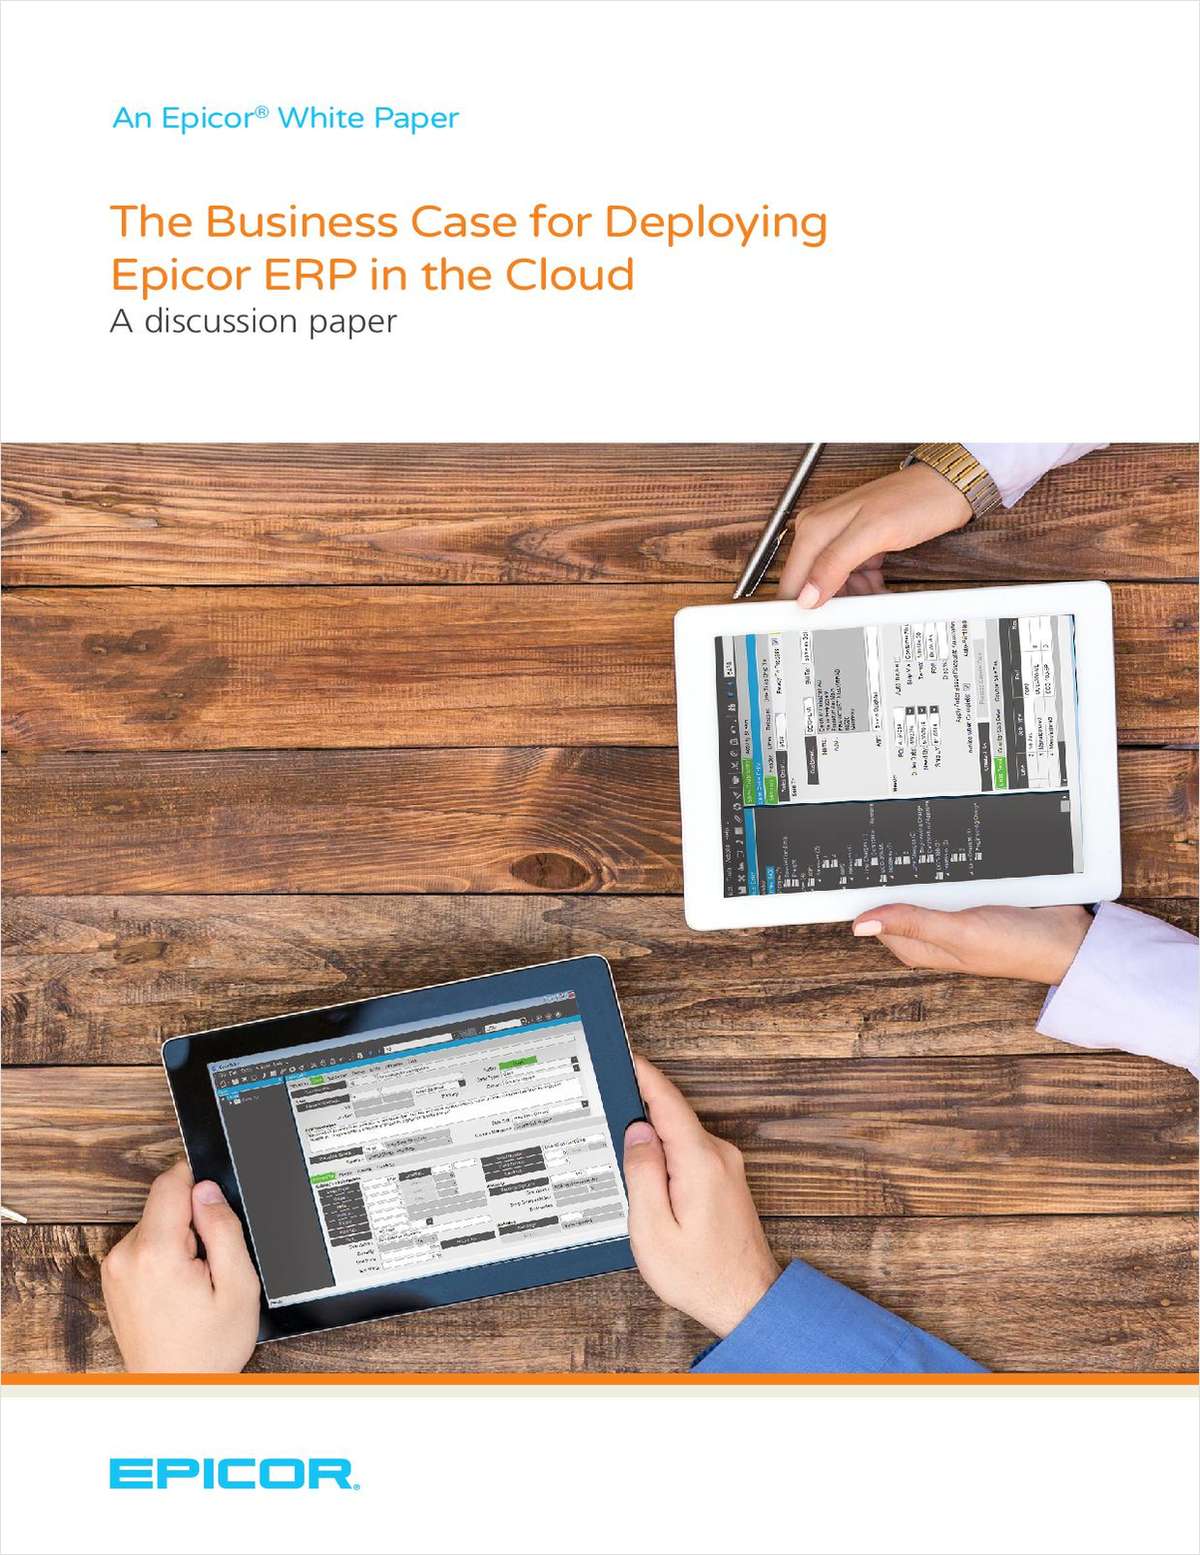 The Business Case for Deploying Epicor ERP in the Cloud